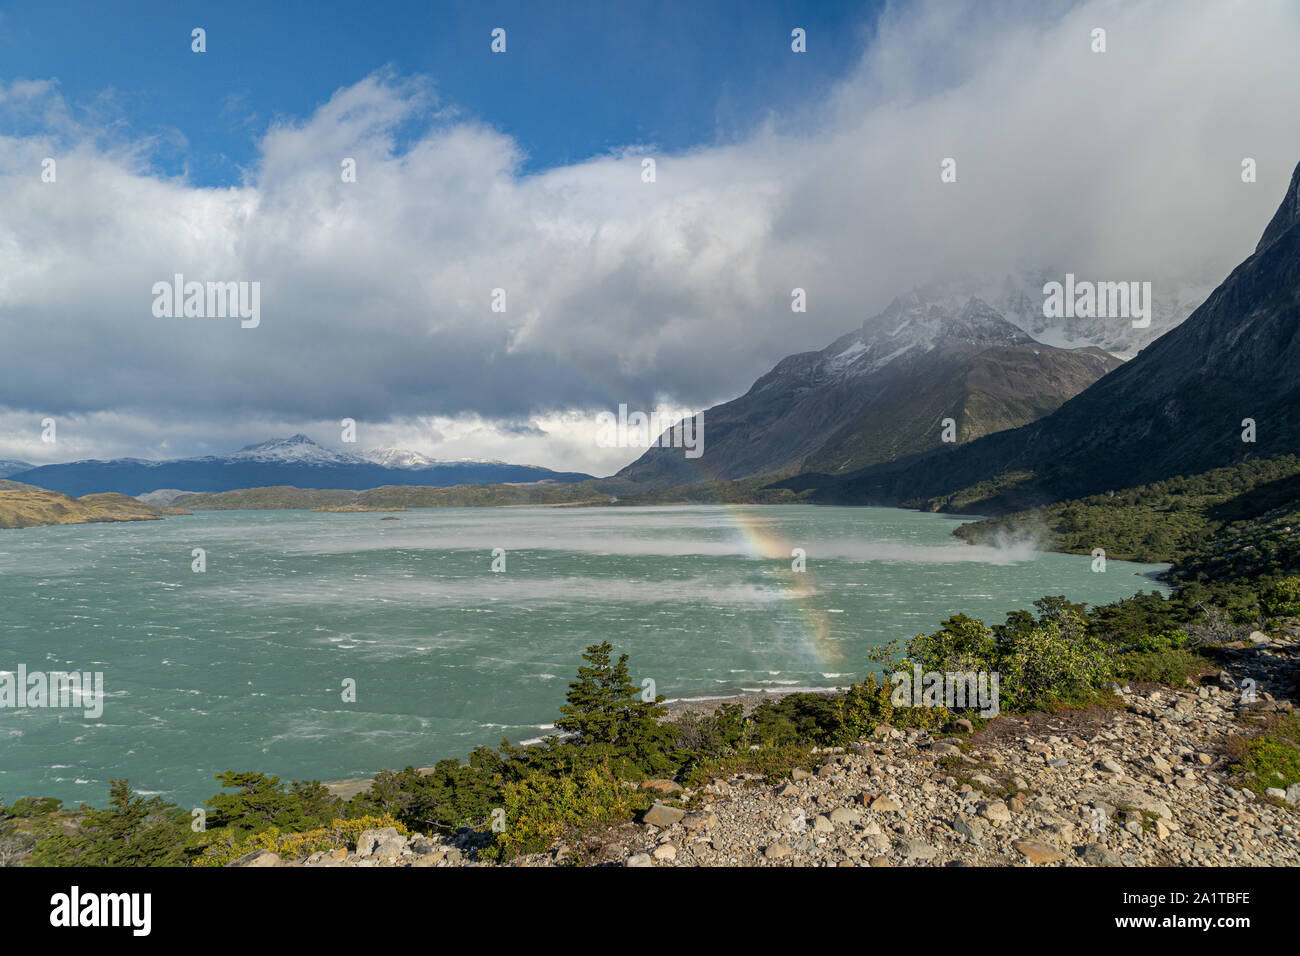 Rainbow over lago nordenskjold, Torres del Paine National Park, Chile. Strong winds pick up lake water and rainbow is created in Torres del Paine Stock Photo